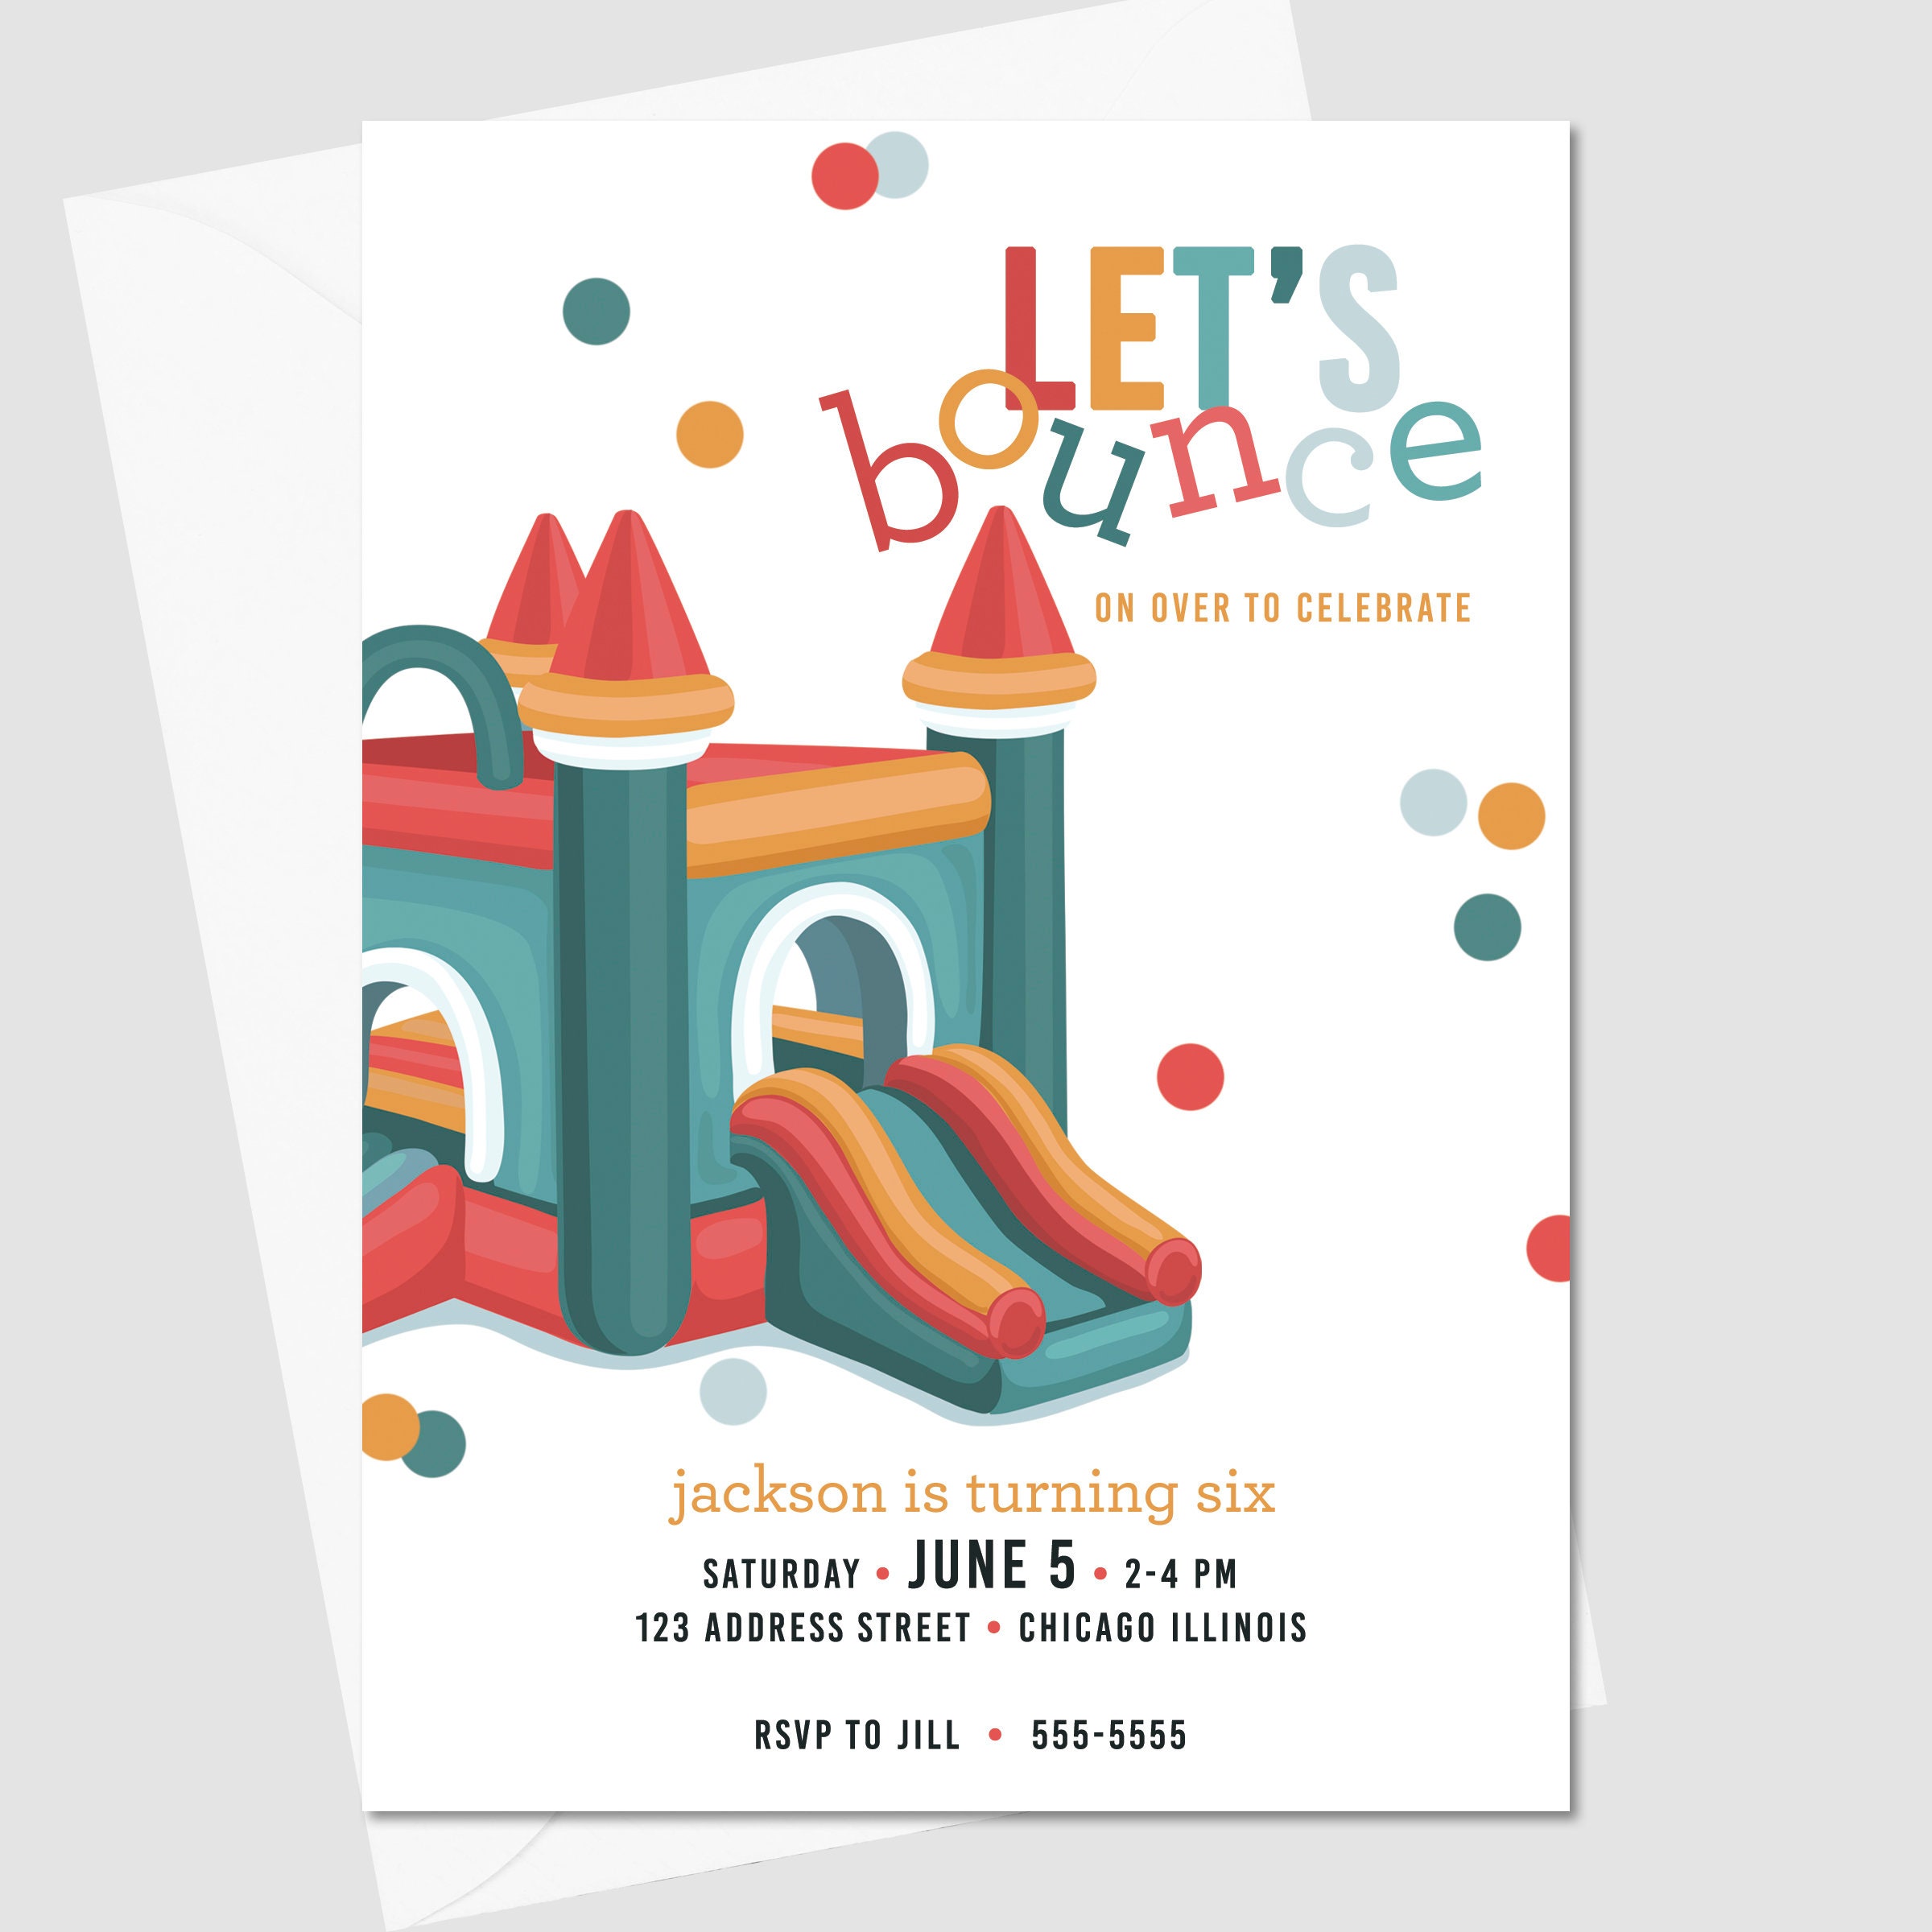 Care Bear Birthday Party Invitation FREE THANK YOU Included 